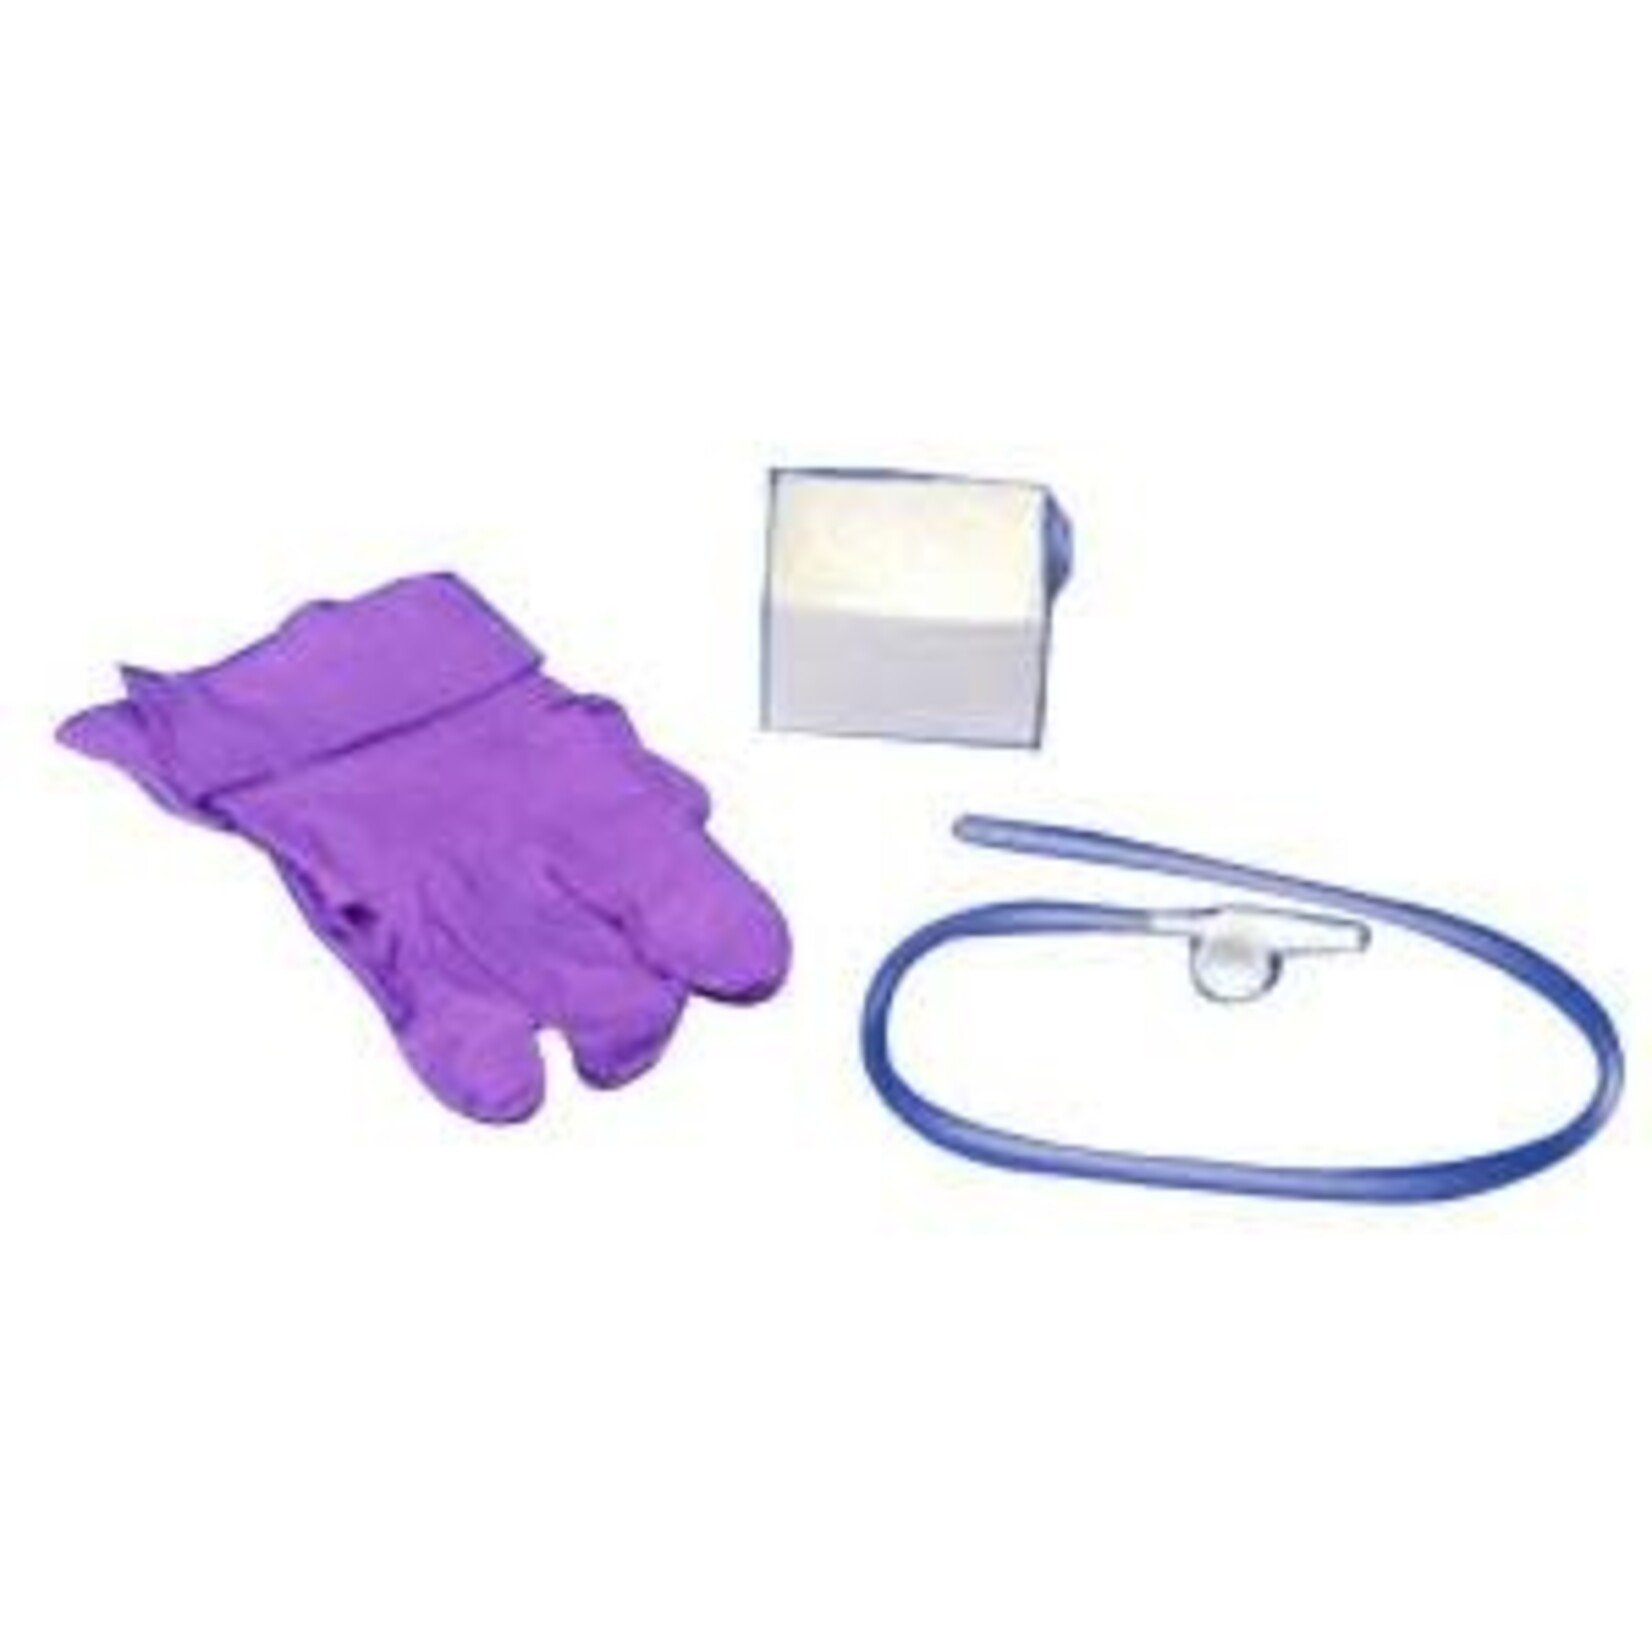 Kendall Suction Catheter Kit 14Fr, with Safe-T-Vac™ Valve, Accessories